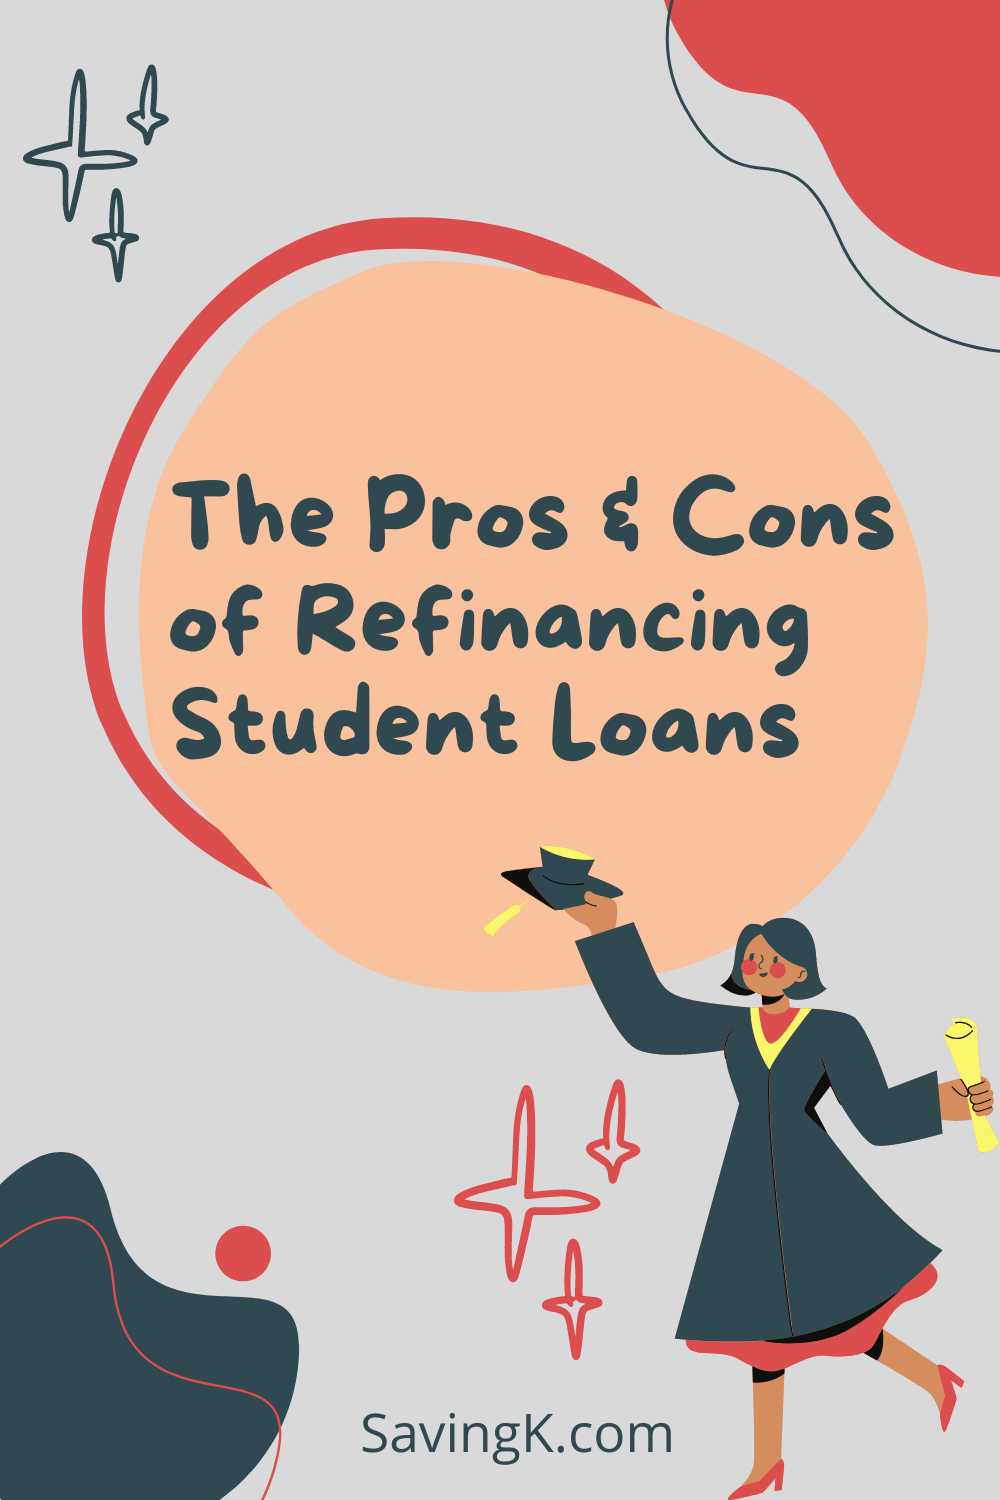 The Pros & Cons of Refinancing Student Loans